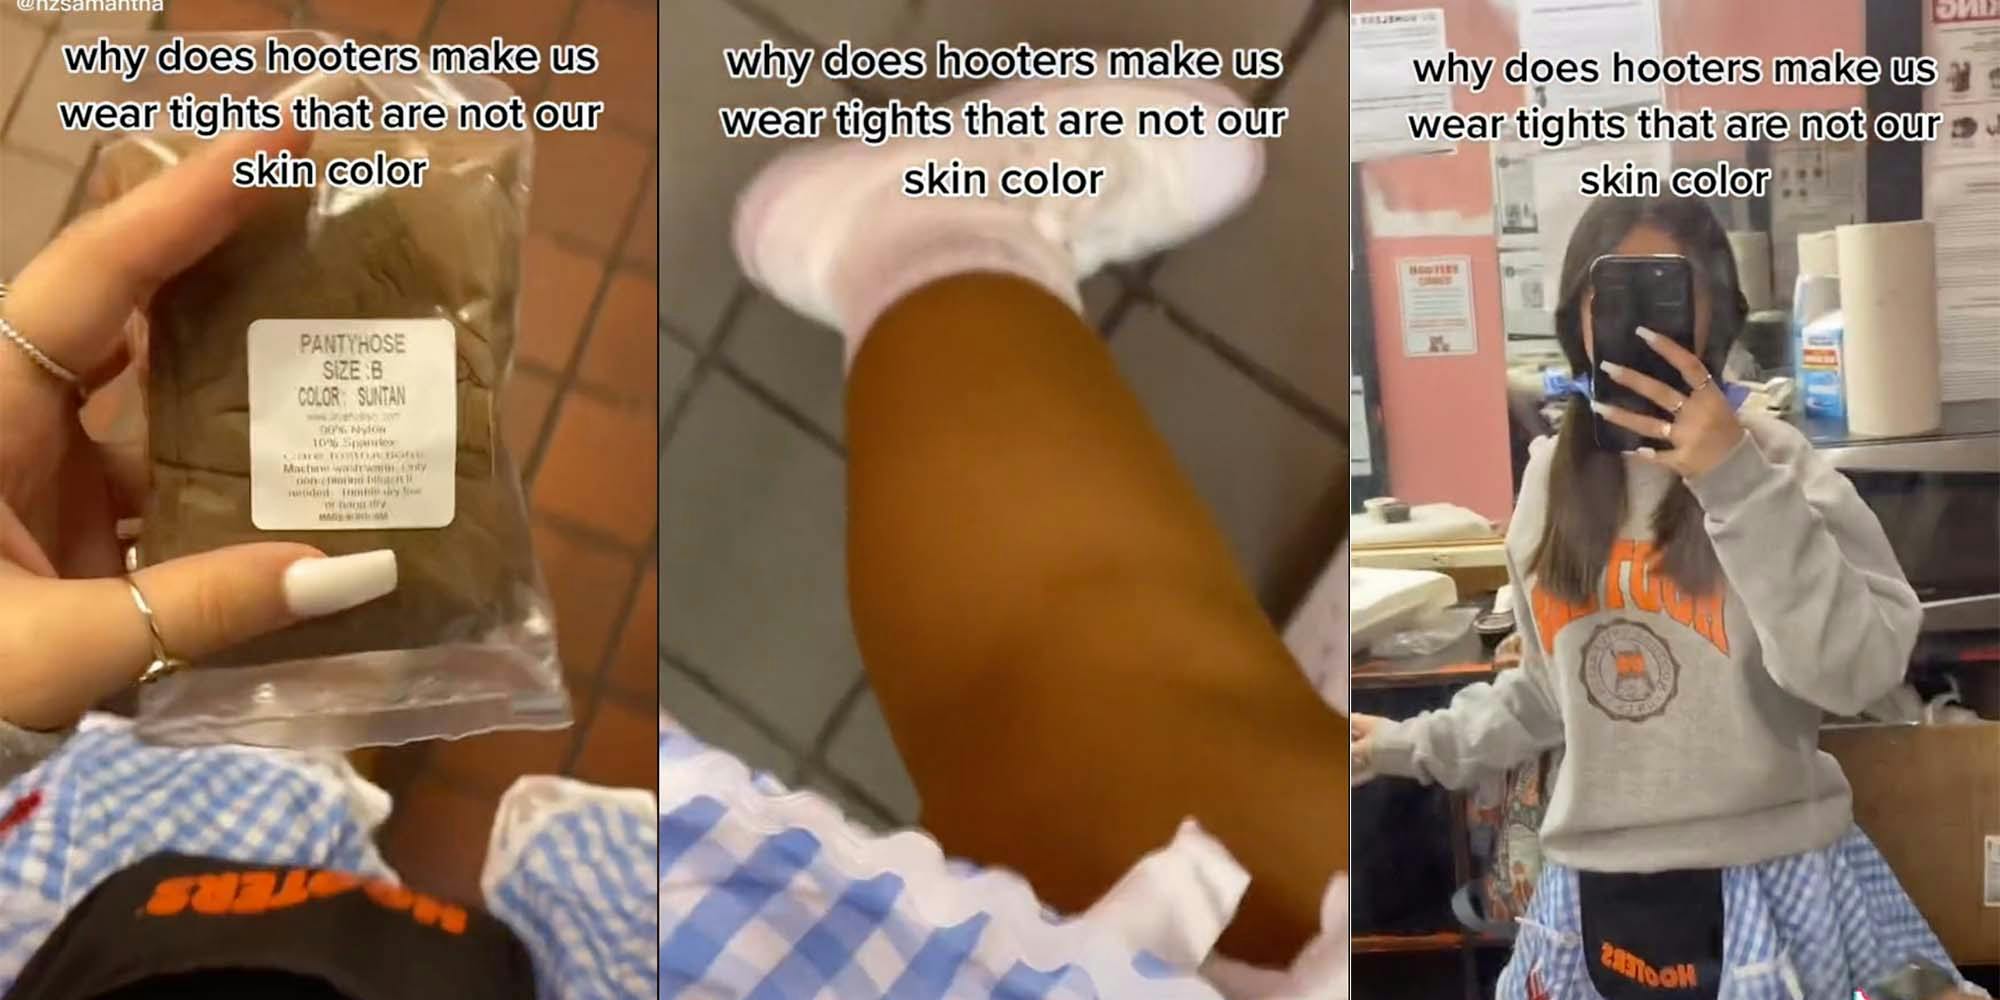 TikTok Shows Hooters Workers Given Tights That Don't Match Skin Color